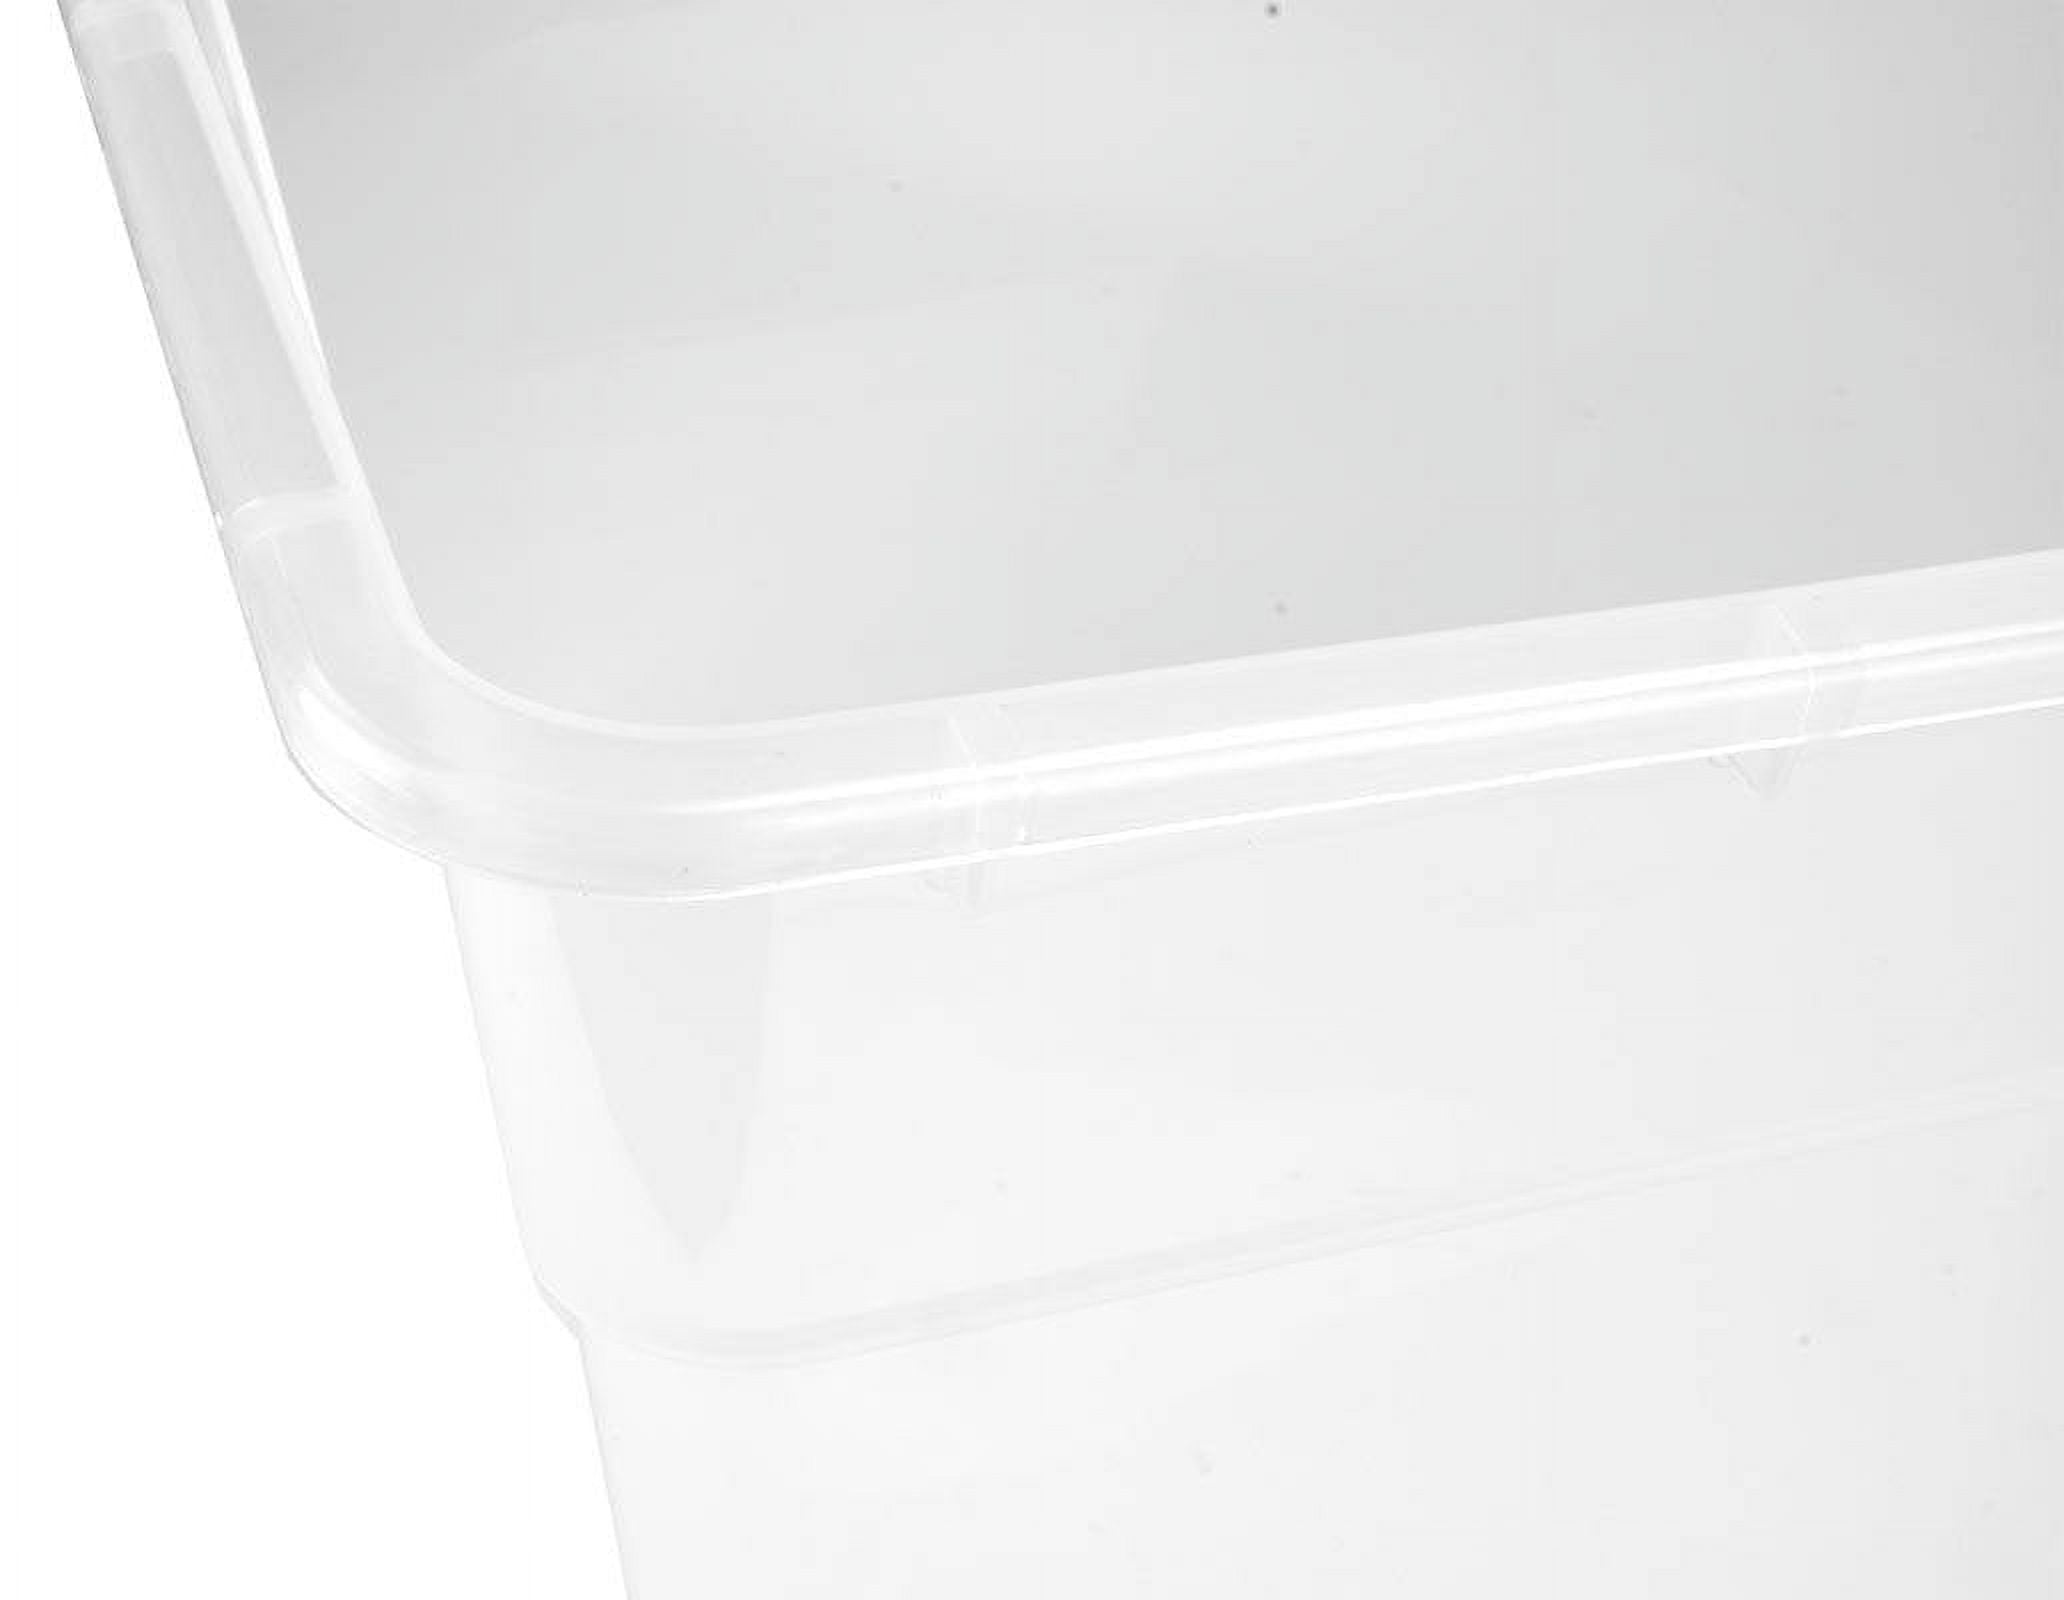 Sterilite Lidded 56 Qt. Clear Bin Home Storage Box Tote Container 16598008  - The Home Depot